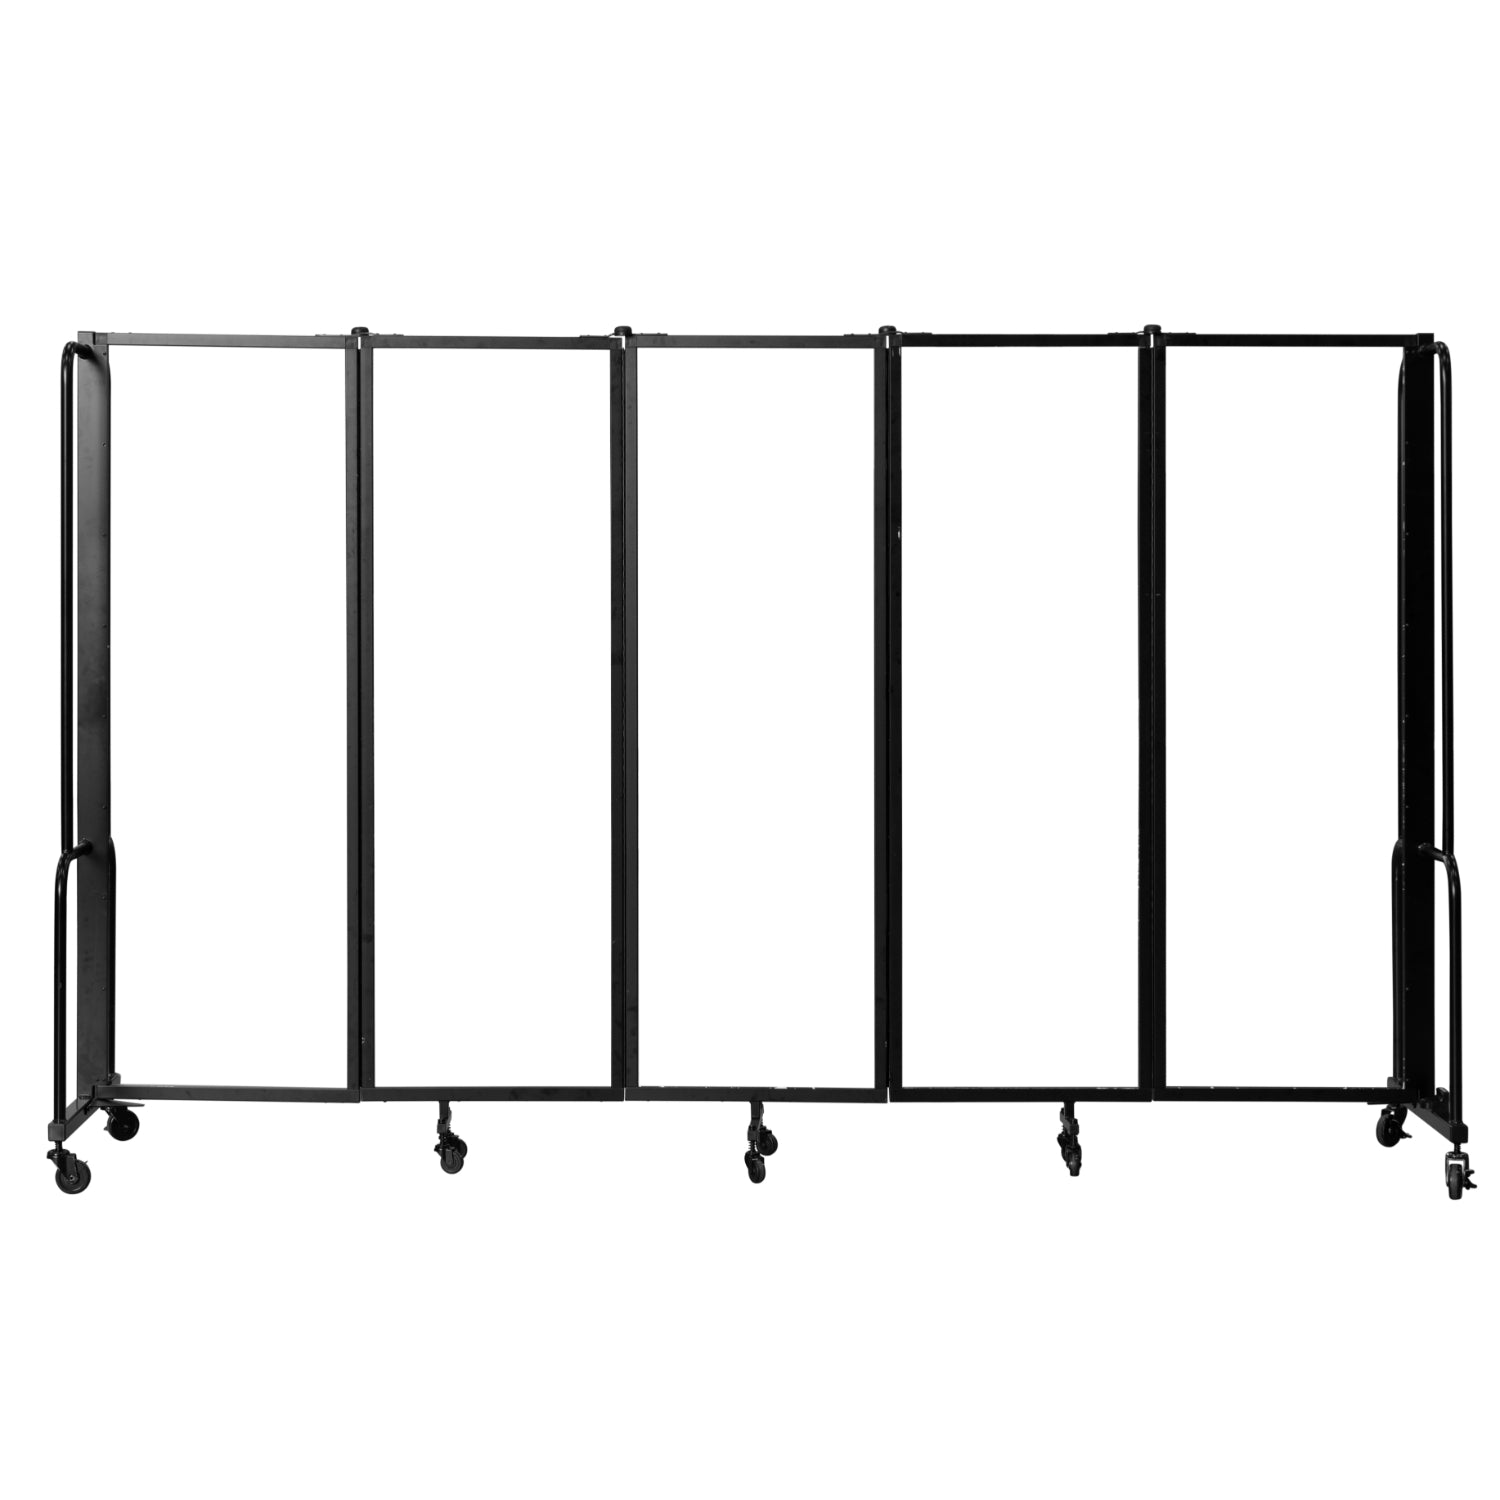 Robo Whiteboard Room Divider with Black Frame, 6' Height, 5 Sections